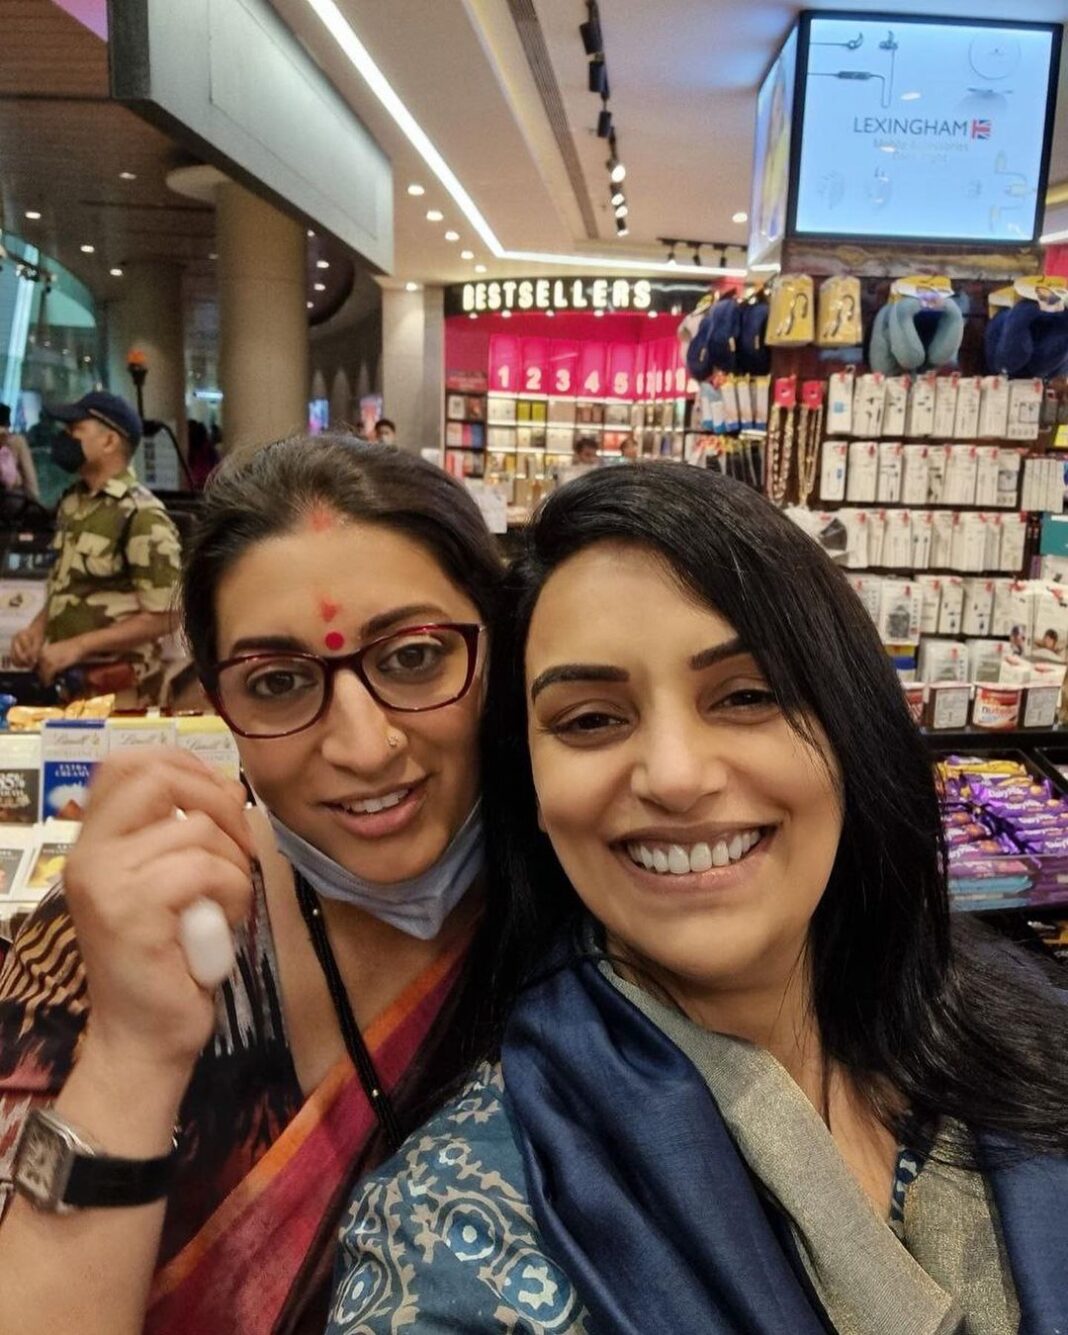 Shweta Menon Instagram - Met @smritiiraniofficial after ages…..almost 20 years since our modelling days together, she's still the same - Charming & A Down to Earth personality ❤️ One of the most promising leaders of our times, wish you the best as always ✌🏼 #smritiirani #smritiiraniofficial #shwethamenon Mumbai, Maharashtra